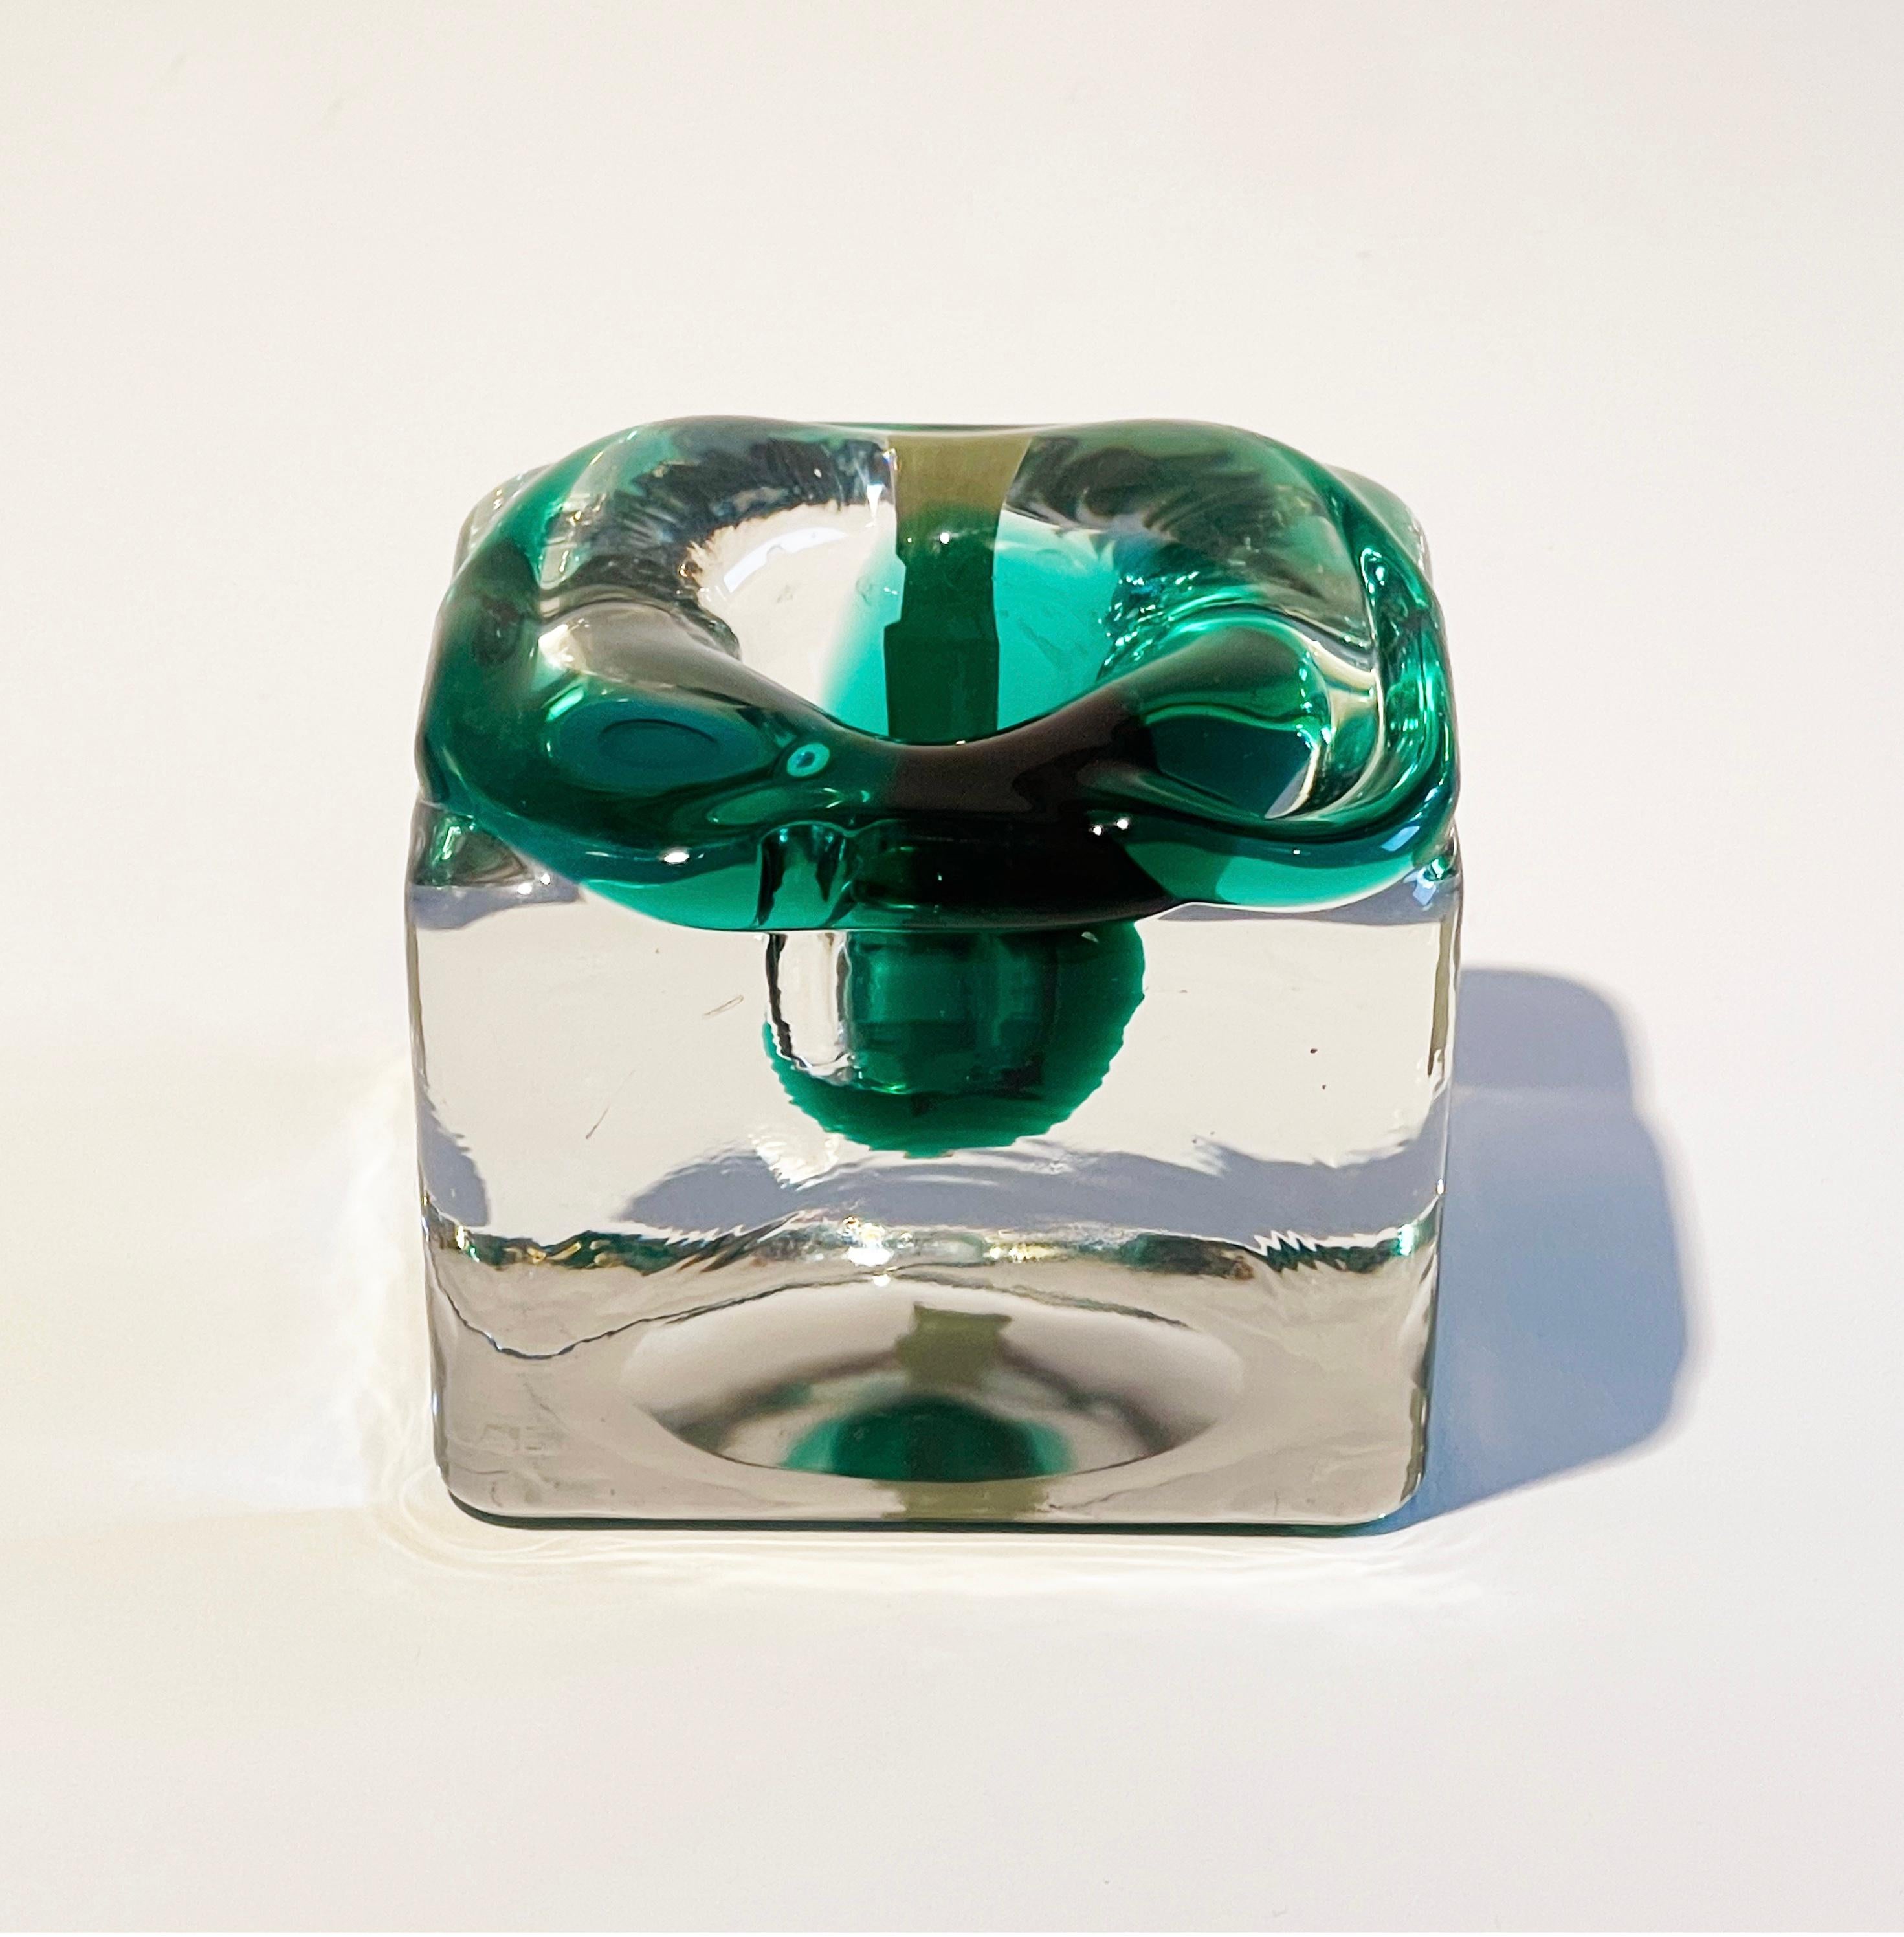 Hand-Crafted 1970s Candlestick Green Sommerso Crystal Glass by Josef Schott Zwiesel, Germany